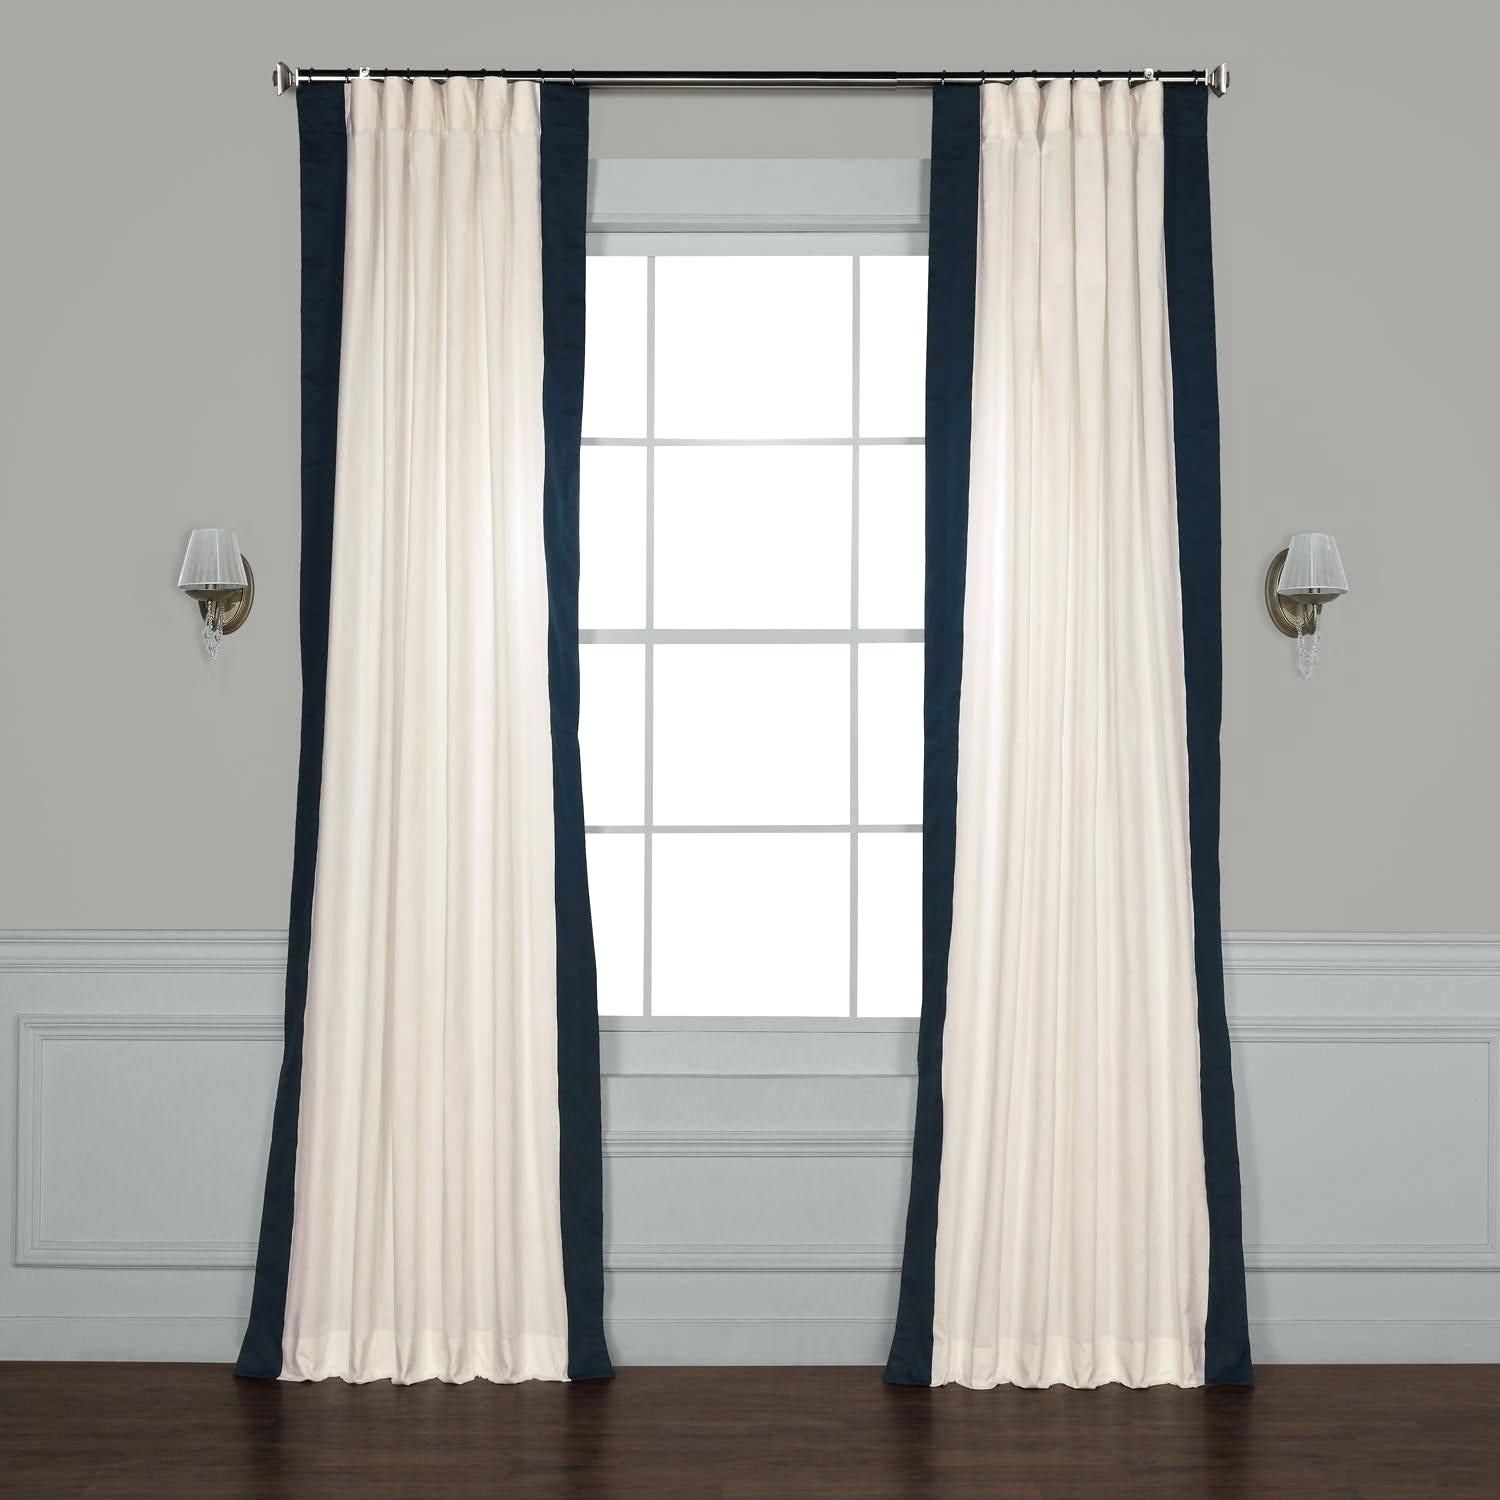 White Cotton Drapes For Living Room Polished Drapery Fabric Within Burgundy Cotton Blend Classic Checkered Decorative Window Curtains (View 16 of 20)